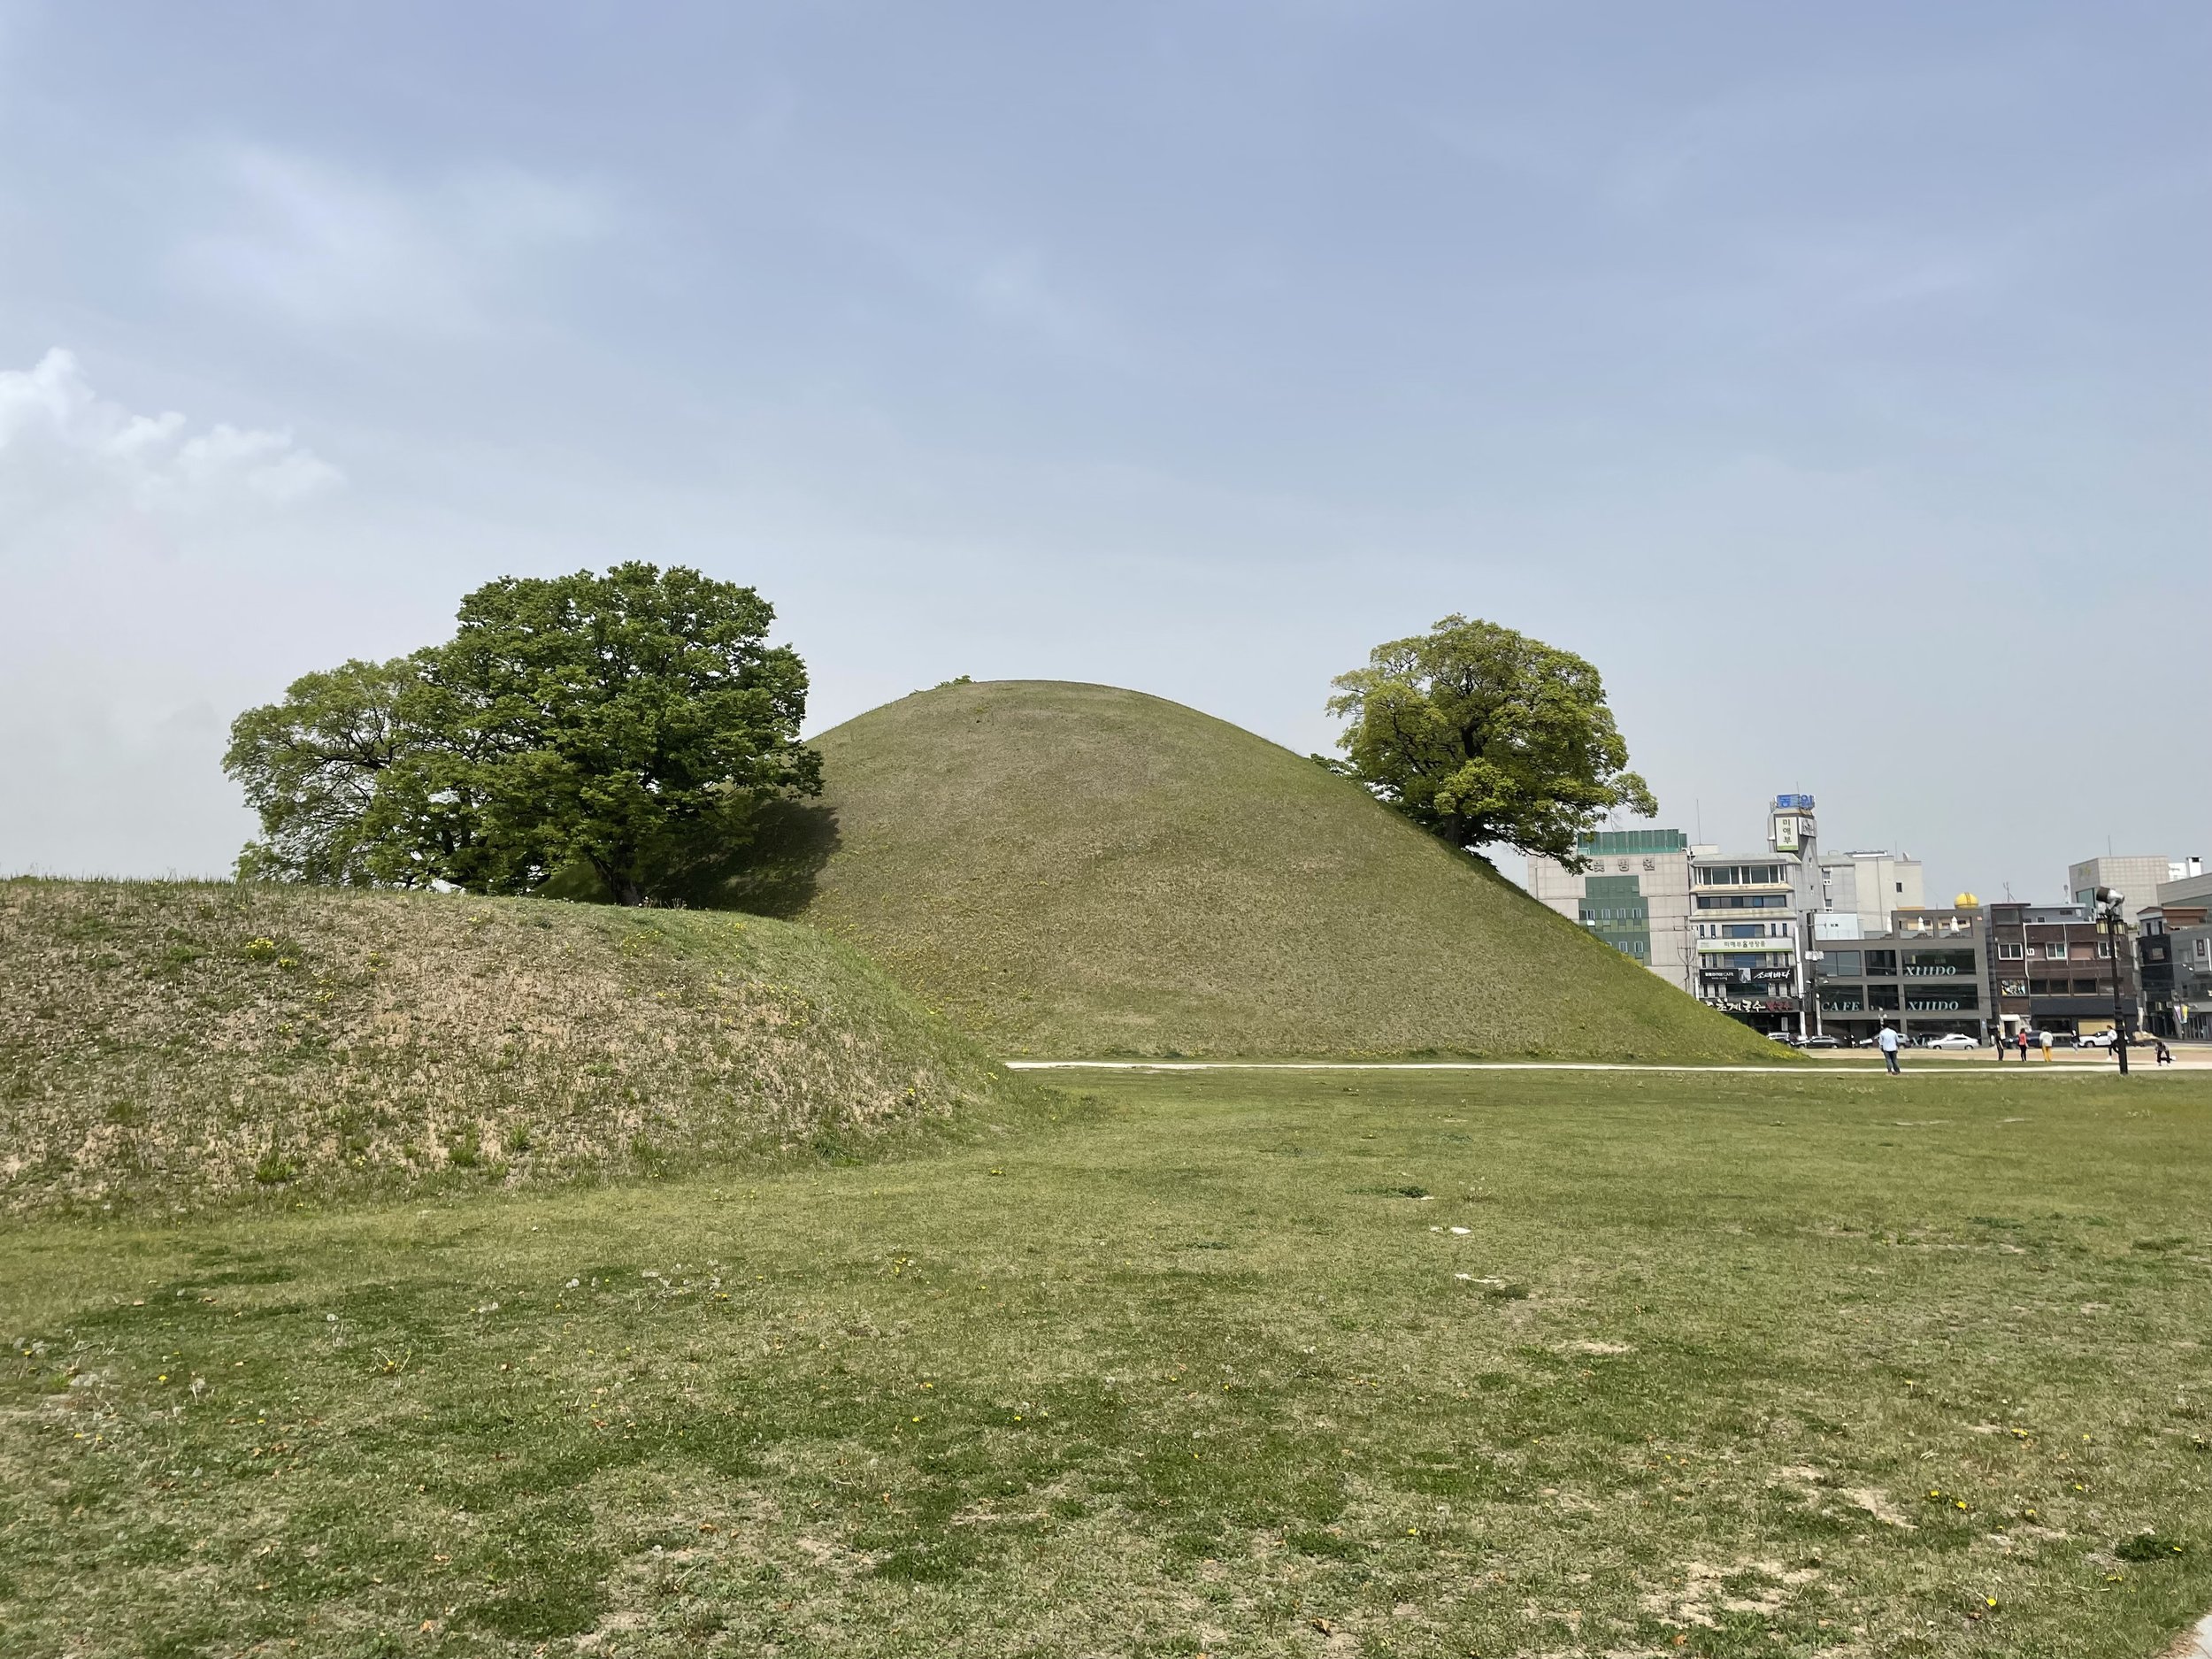 Mounds in the Noseodong Area